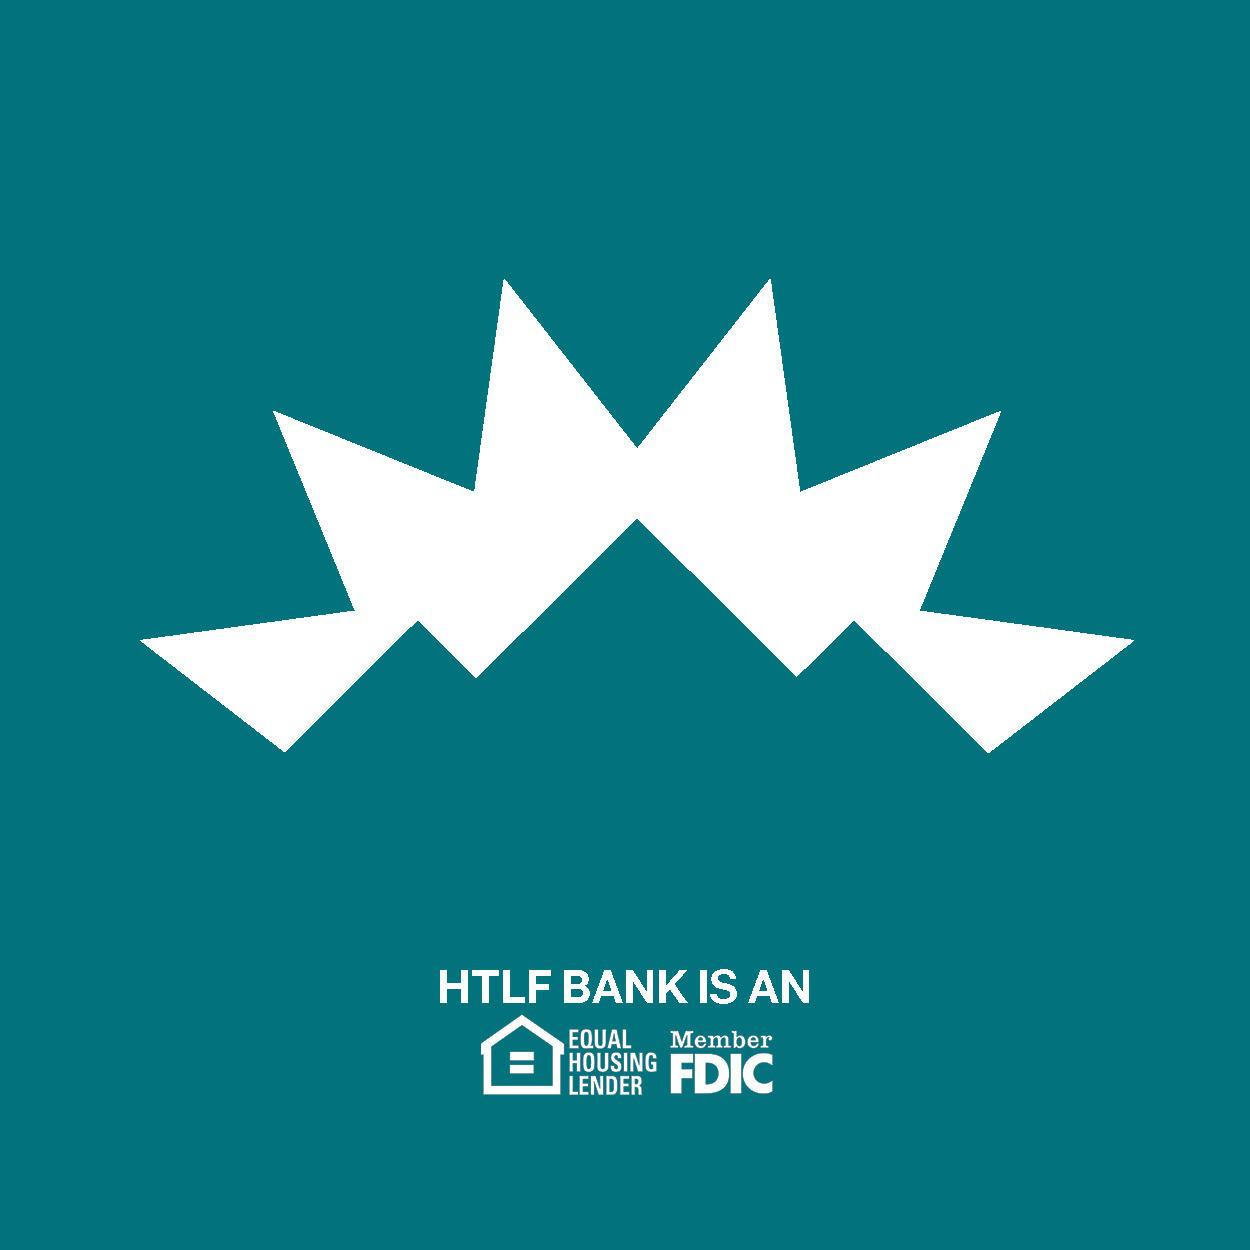 New Mexico Bank & Trust, a division of HTLF Bank